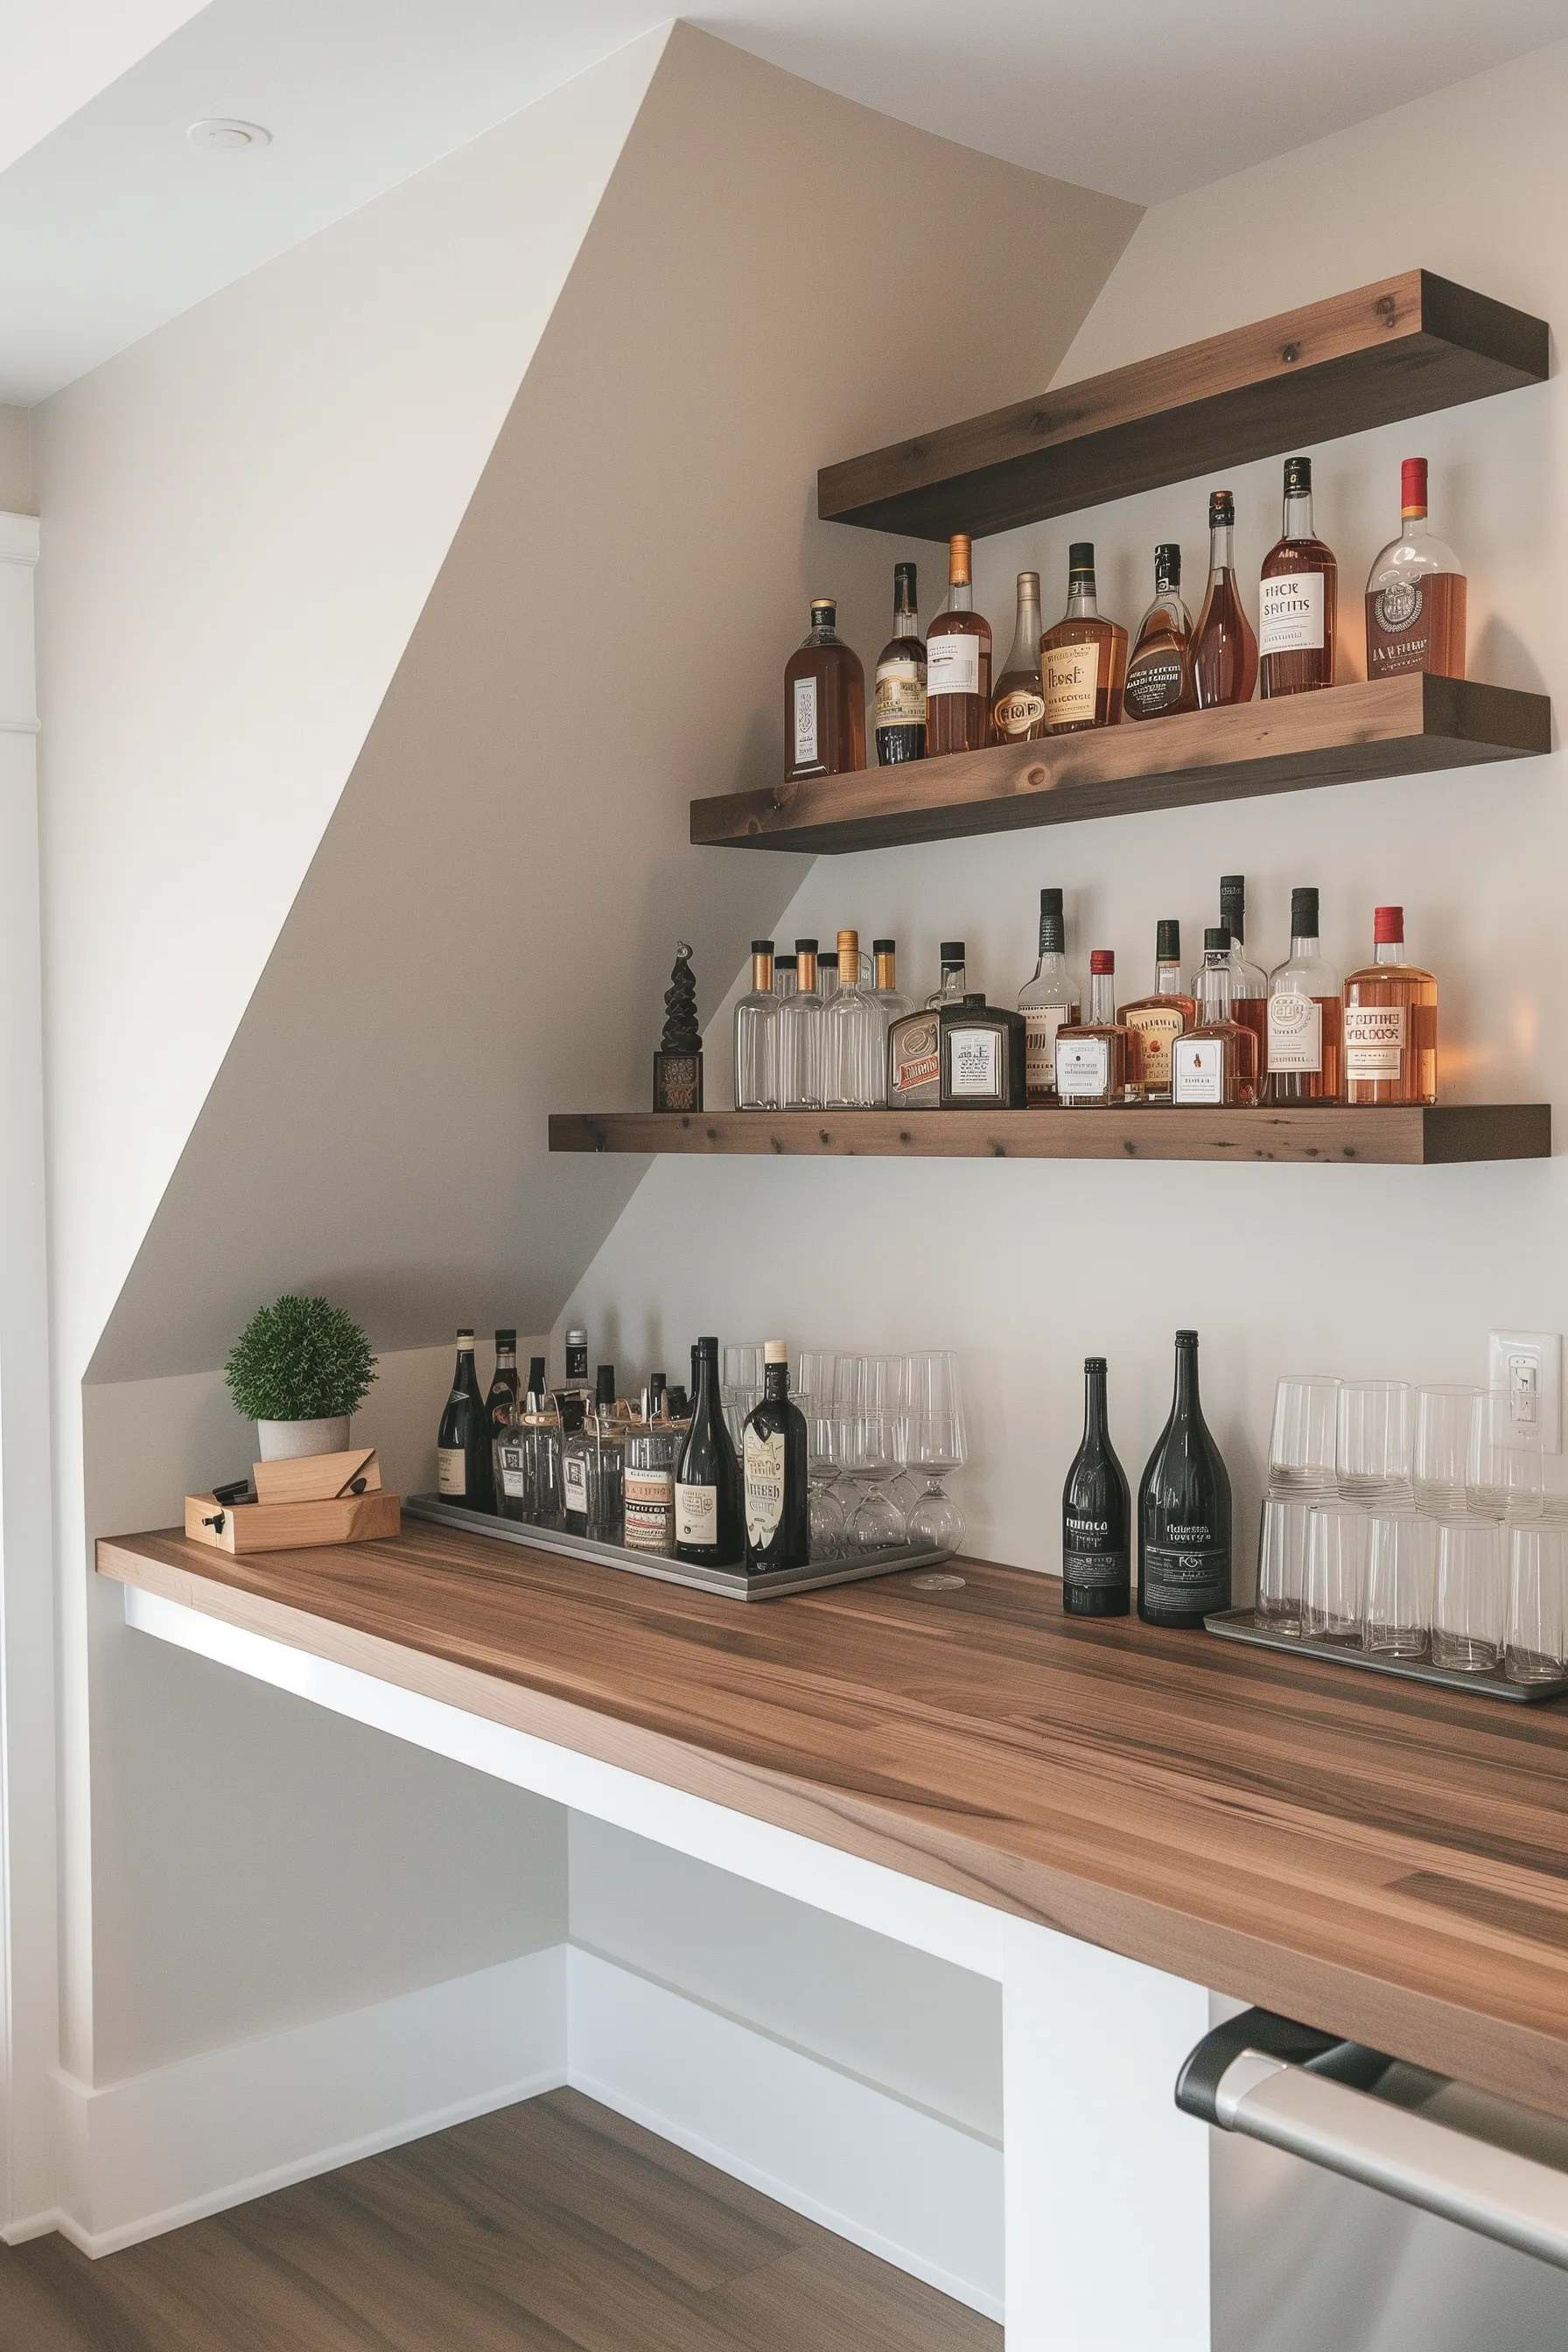 A corner bar nook with wood